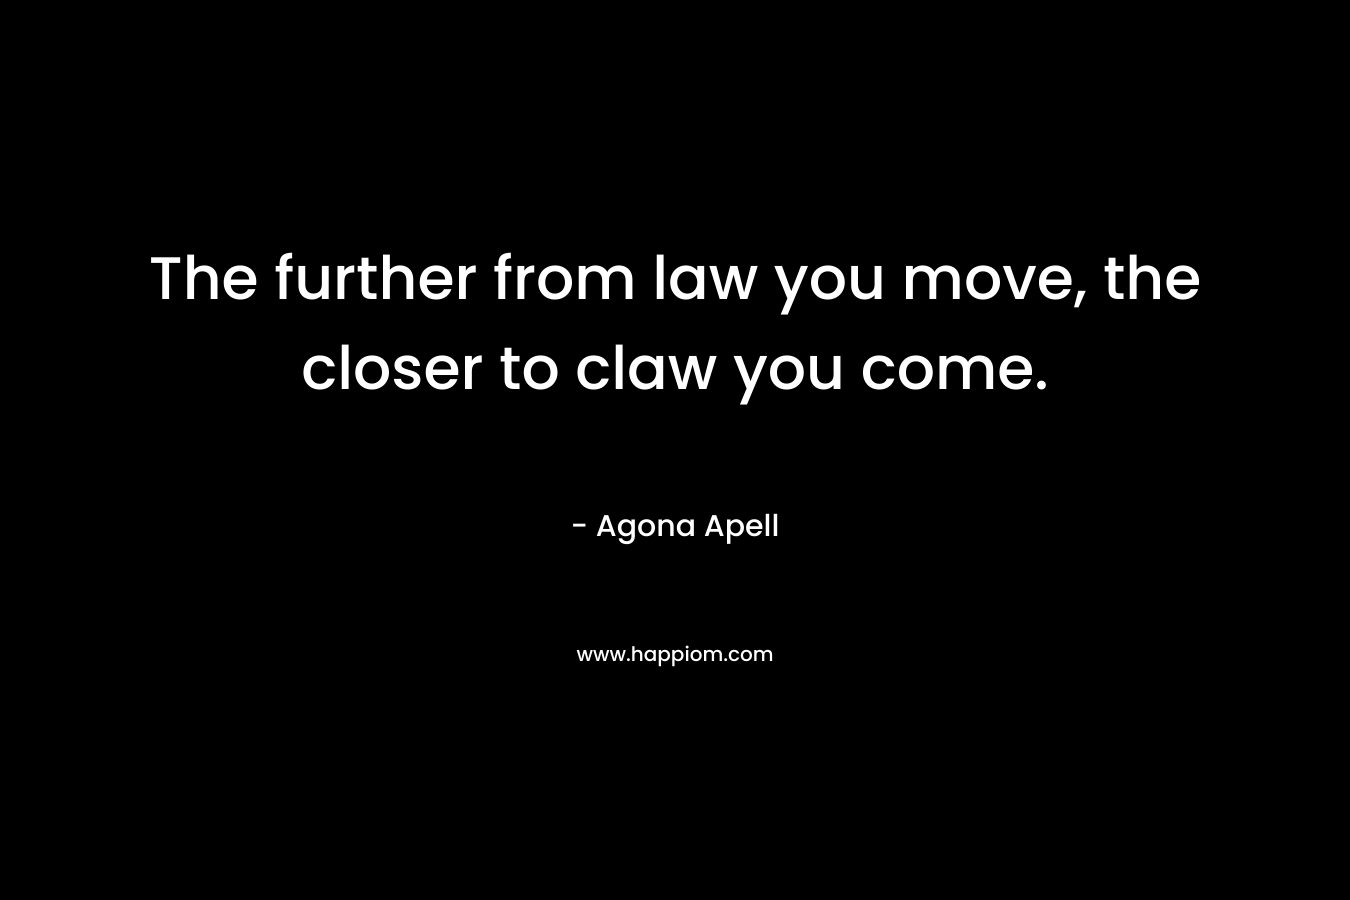 The further from law you move, the closer to claw you come. – Agona Apell